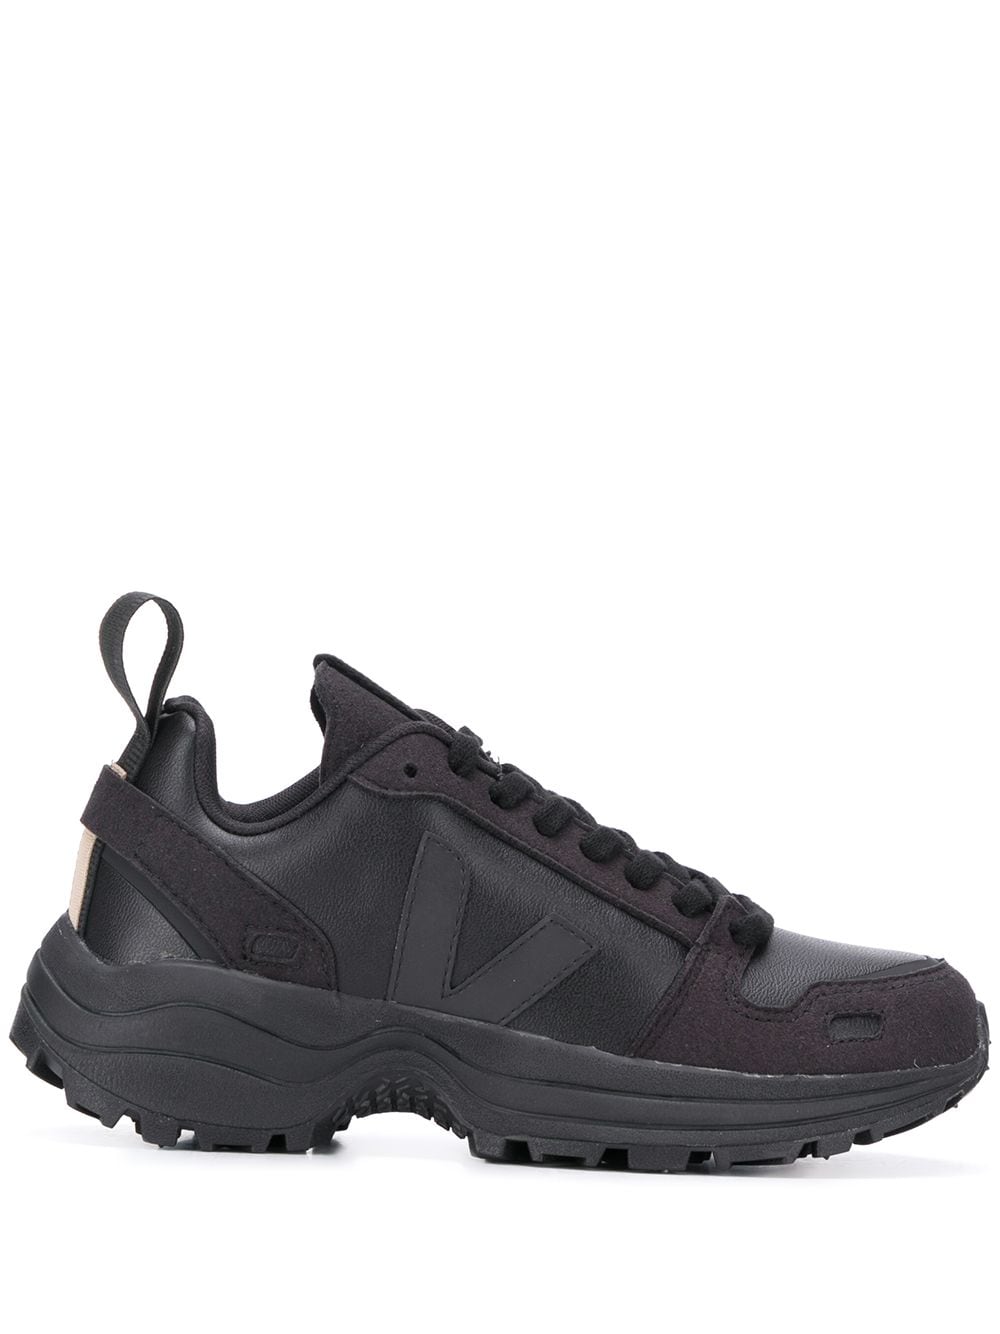 Rick Owens Wide lace-front Sneakers - Farfetch